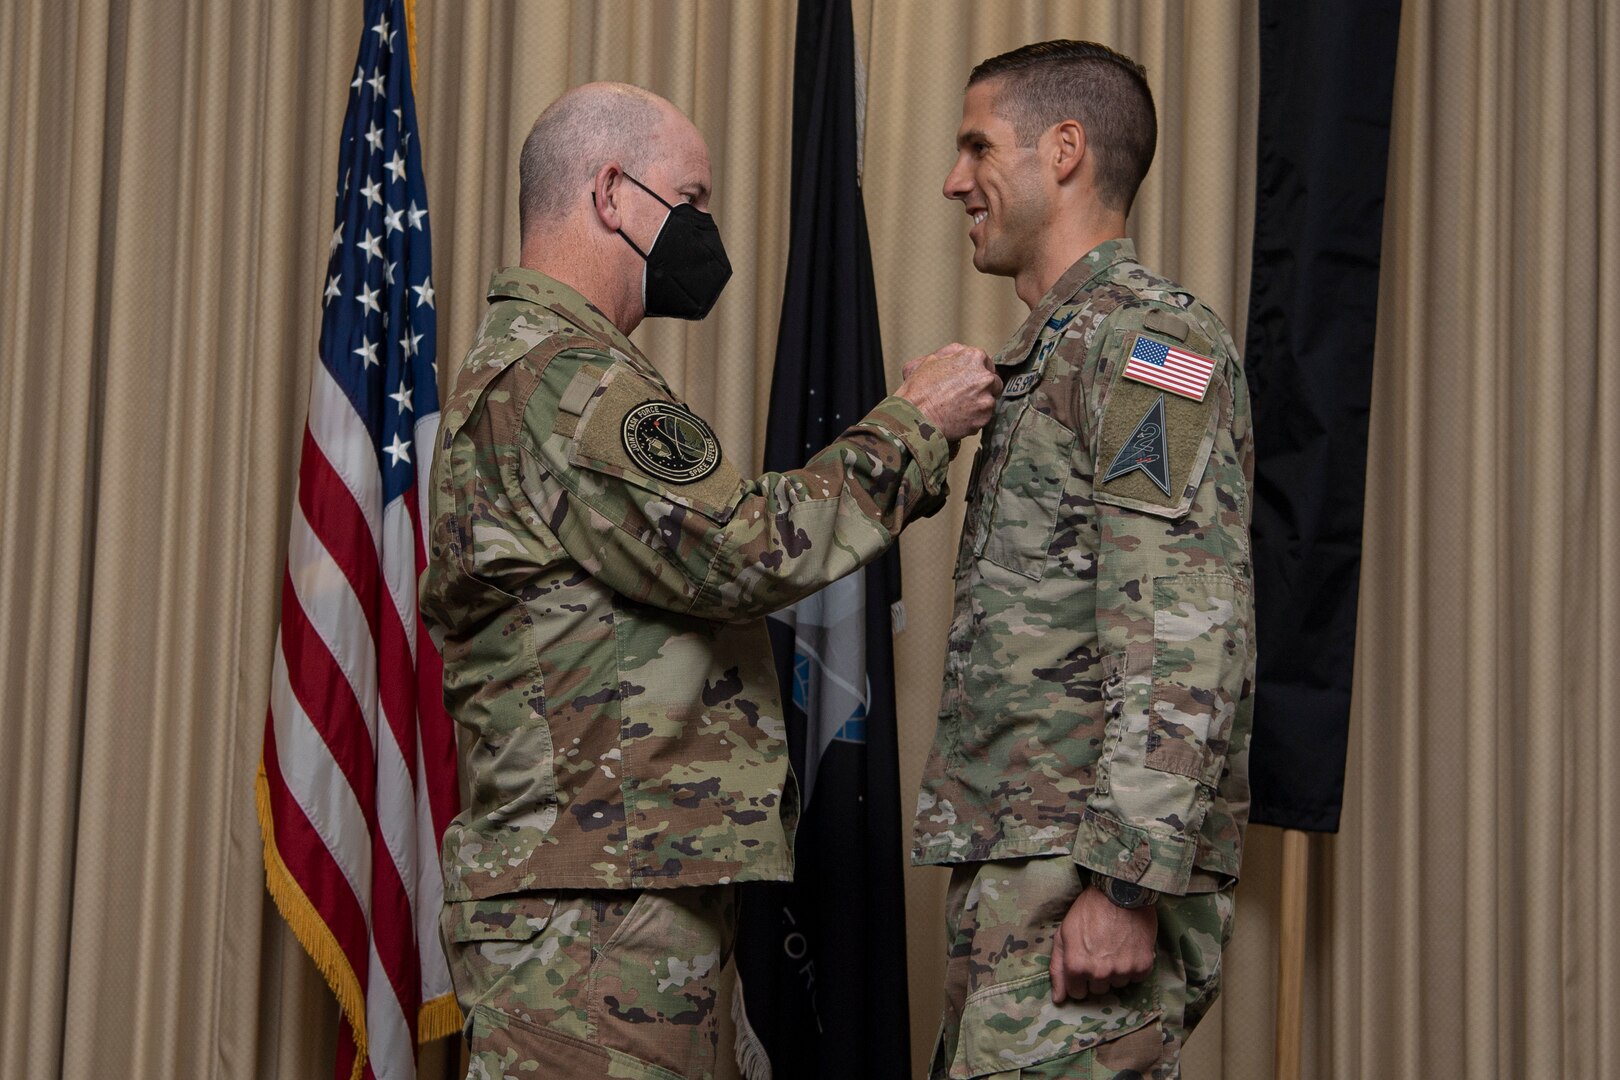 Military man in uniform pinning medal onto another military man in uniform